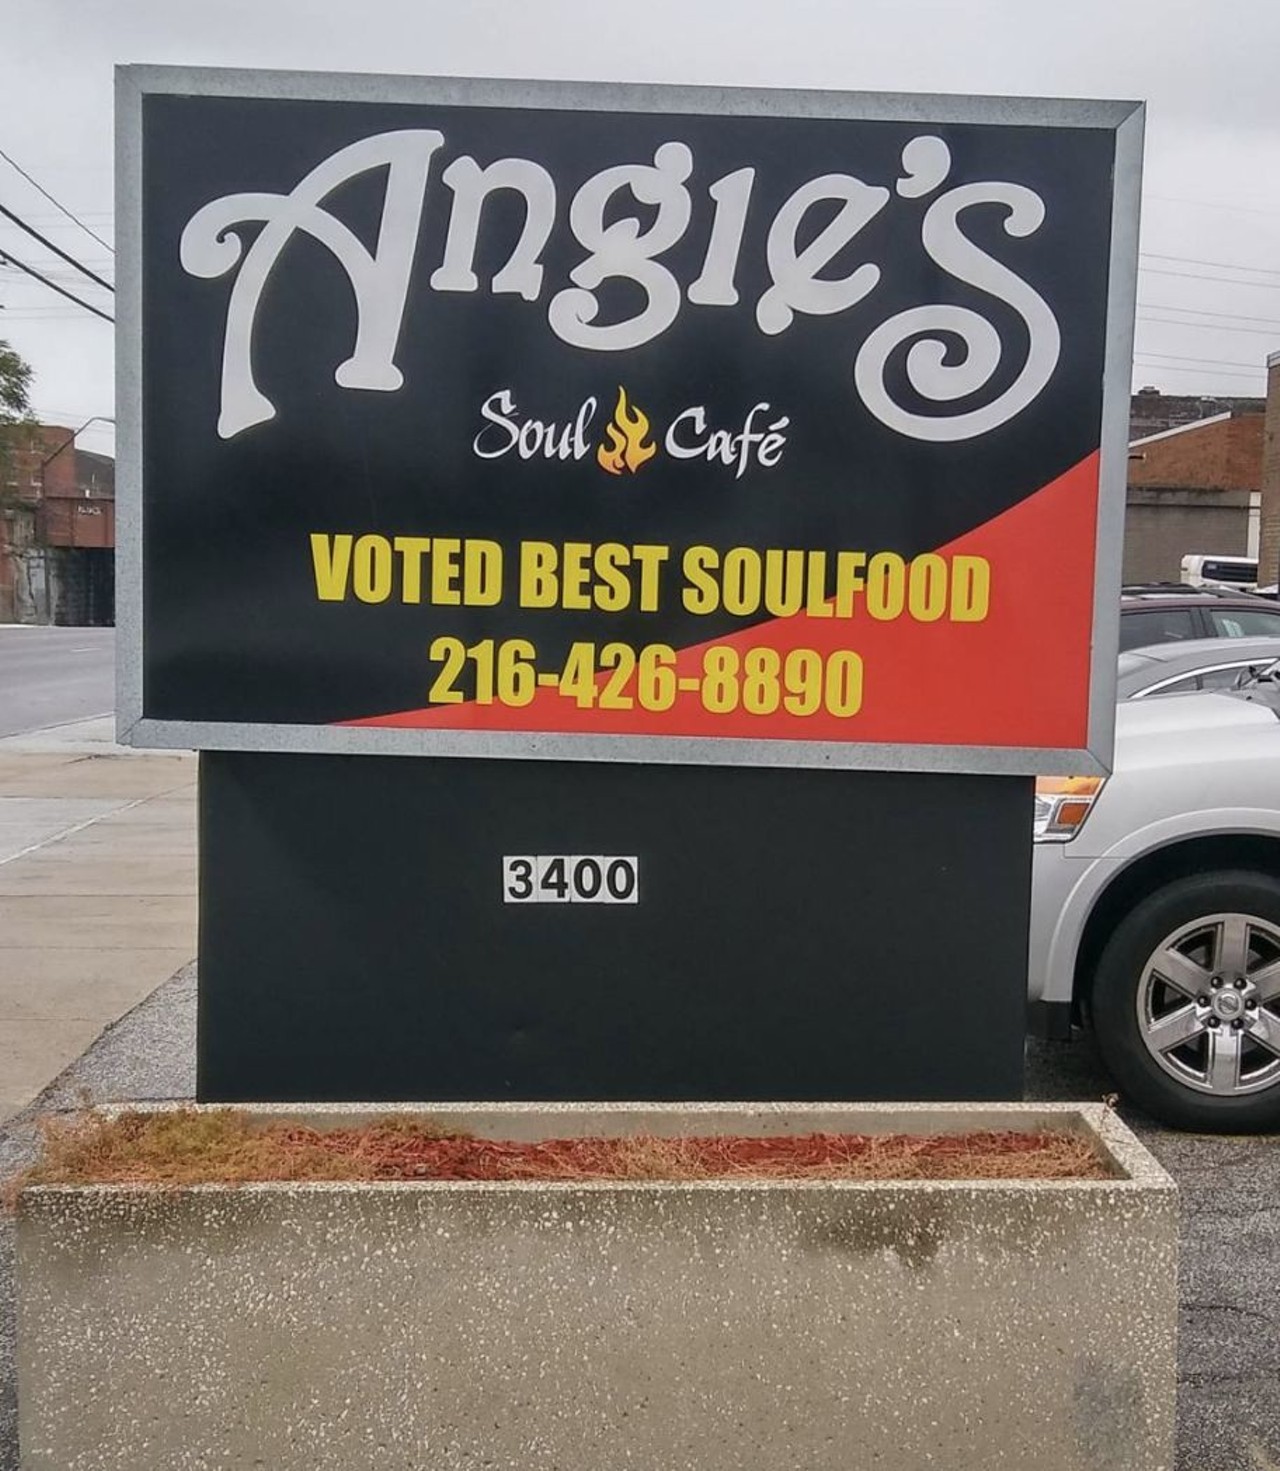  Angie&#146;s Soul Cafe
Multiple Locations 
With soul cafe in the name of the restaurant, this is the spot for that good southern comfort cooking. While you can&#146;t go wrong with the collard greens and candied yams, you'll have to get the fried chicken, in either dark or white meat.
Photo via @BakerDewayne/Instagram